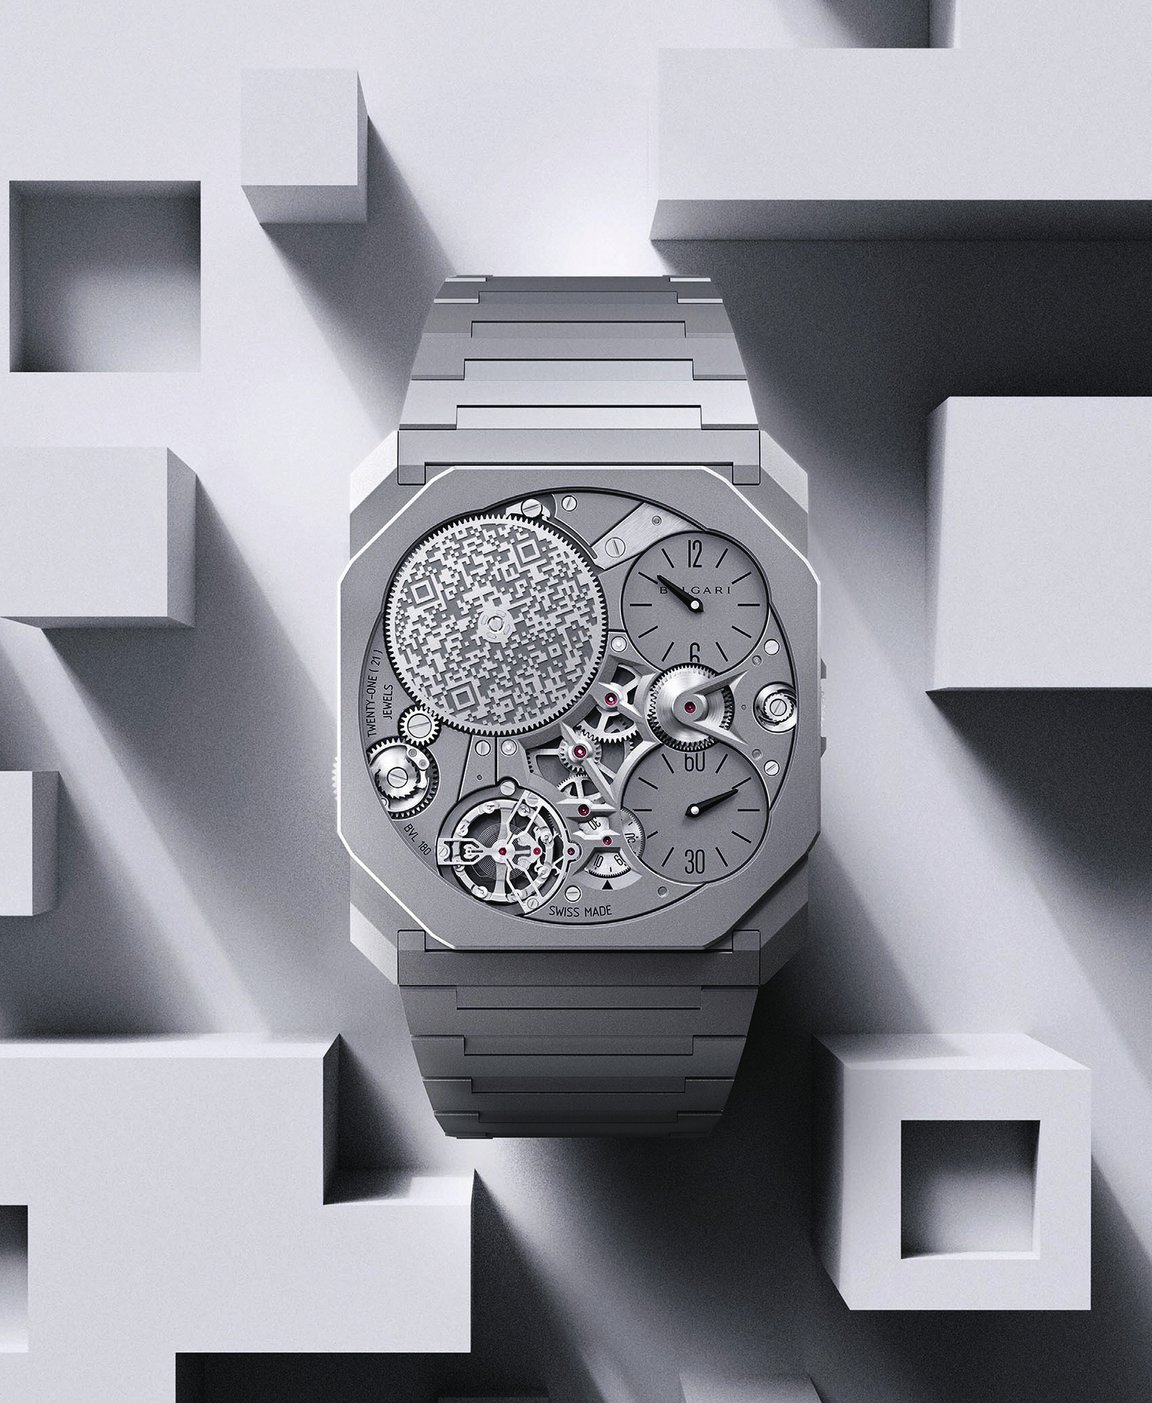 Entering a New Dimension with the Bulgari Octo Finissimo Ultra